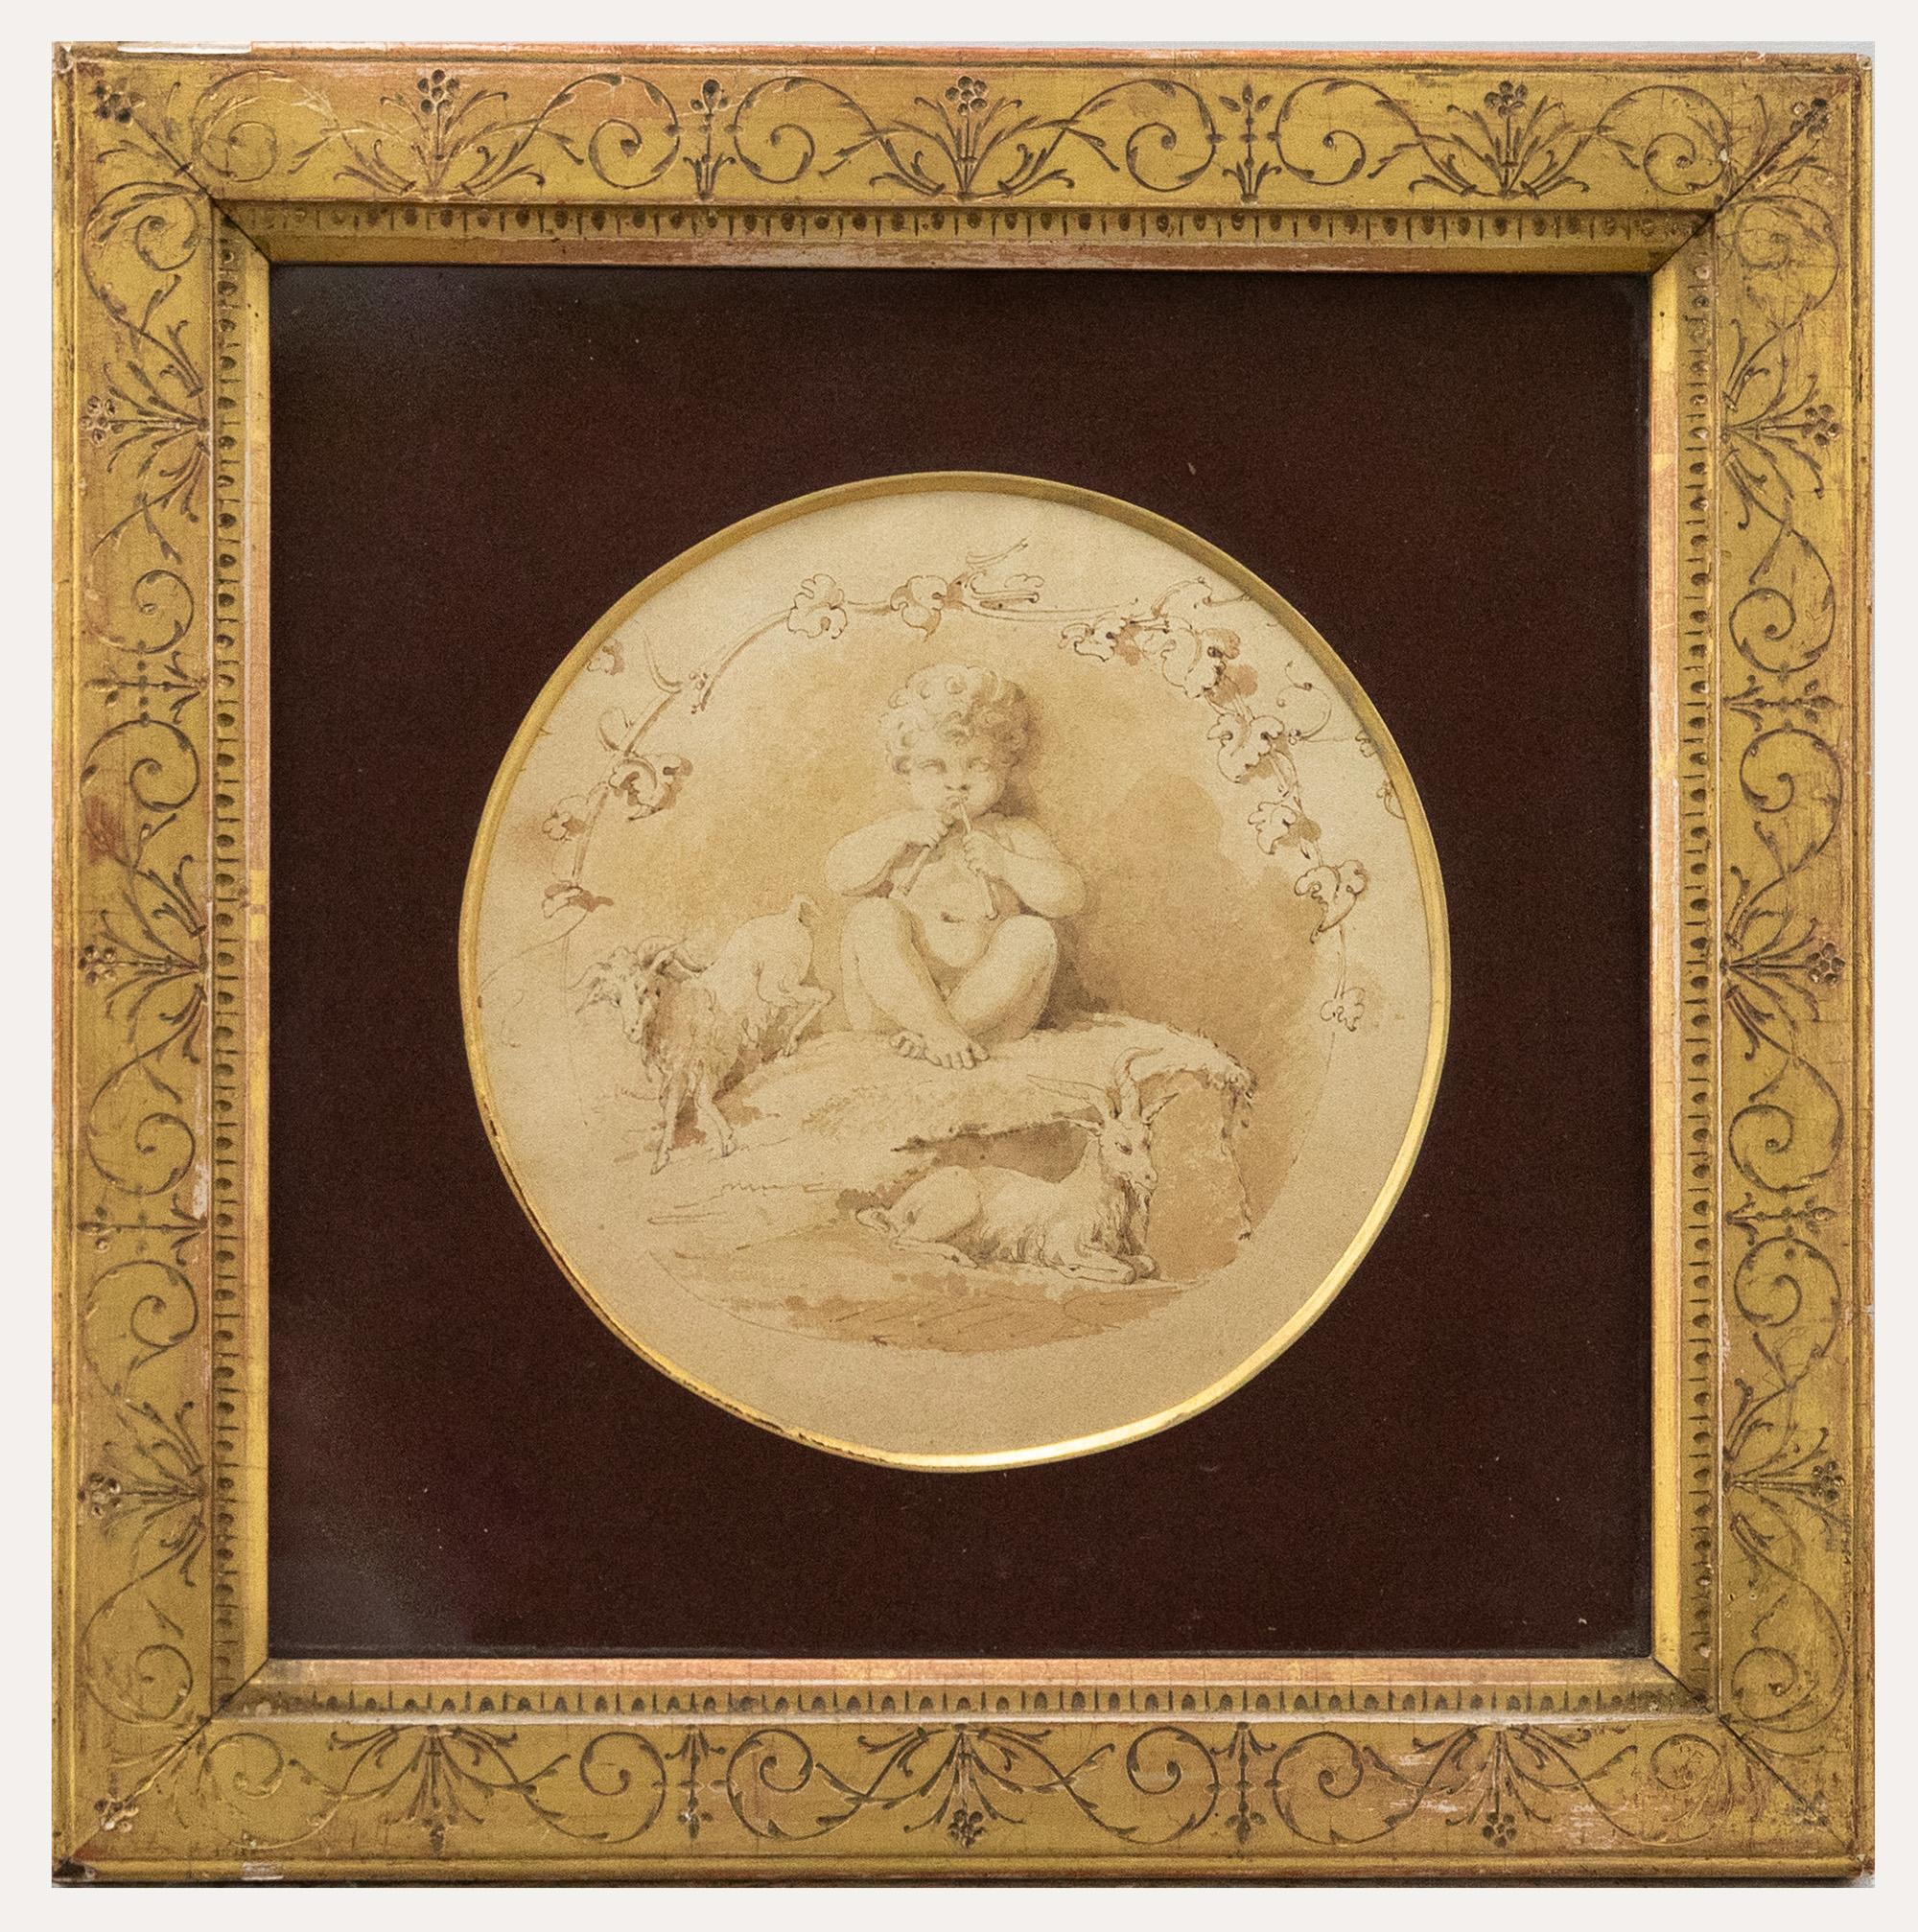 A delicate 18th century sepia watercolour depicting The Infant Bacchus with Goats. Beautifully presented in a period gilt frame with sgraffito decoration. Much of the artist's graphite workings can still be seen within the scene. Inscribed verso 'by